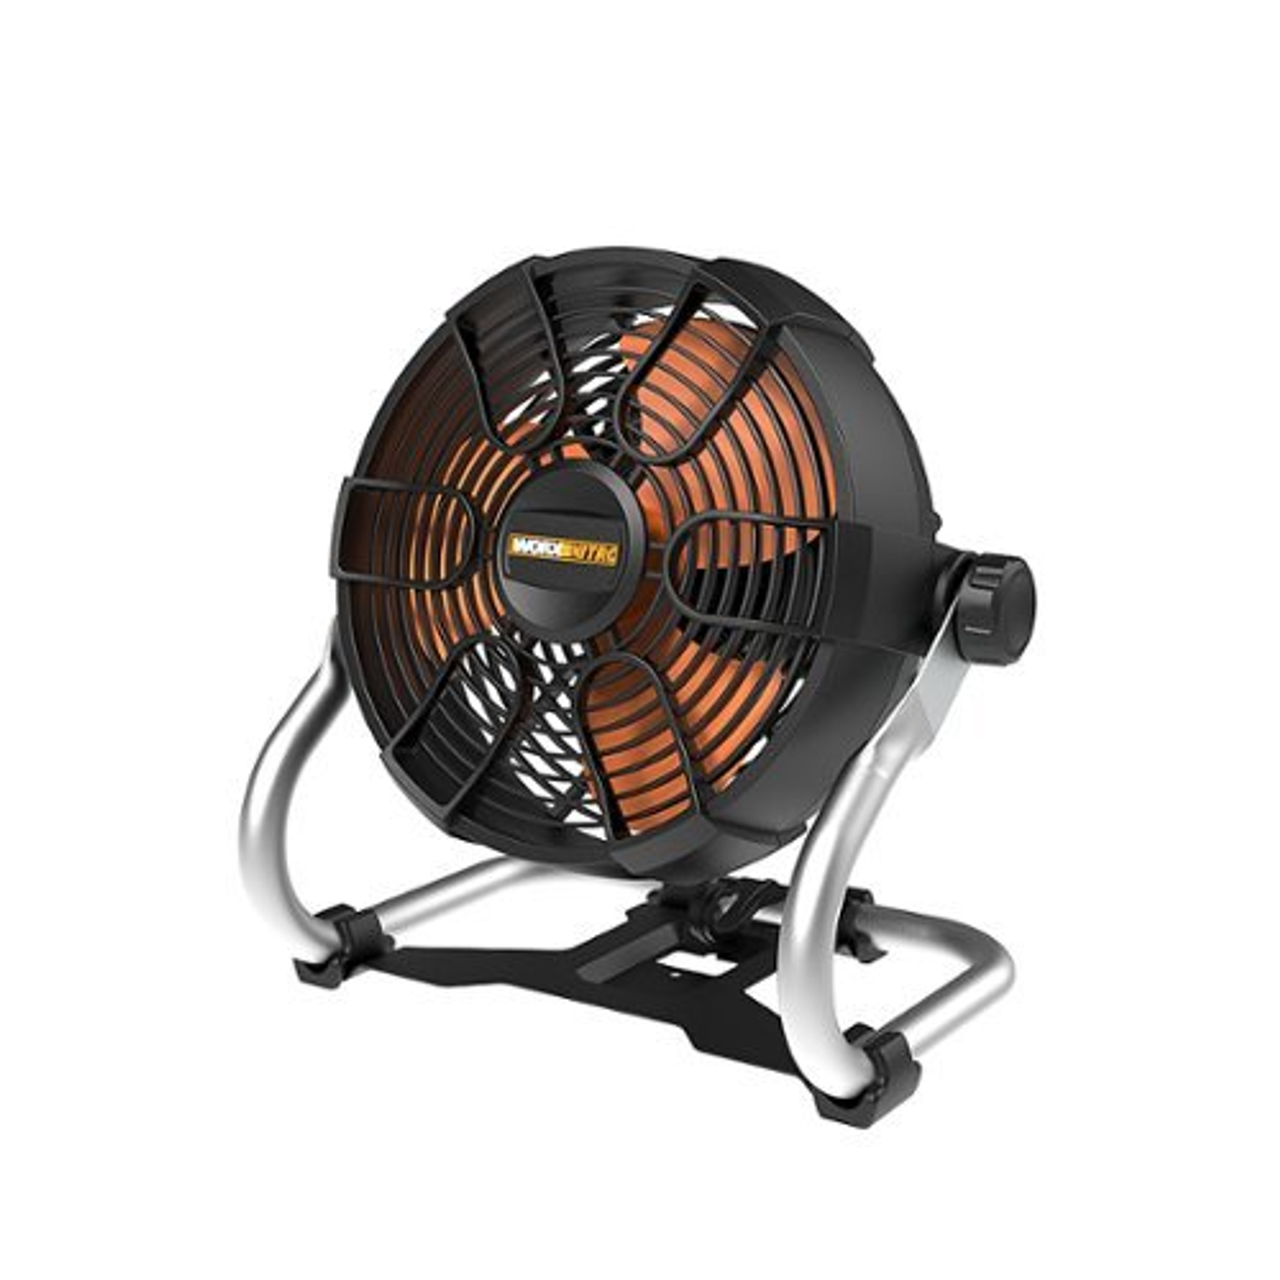 Worx WX095L Nitro 20V Power Share Cordless 9" Work Fan (Battery & Charger Included)